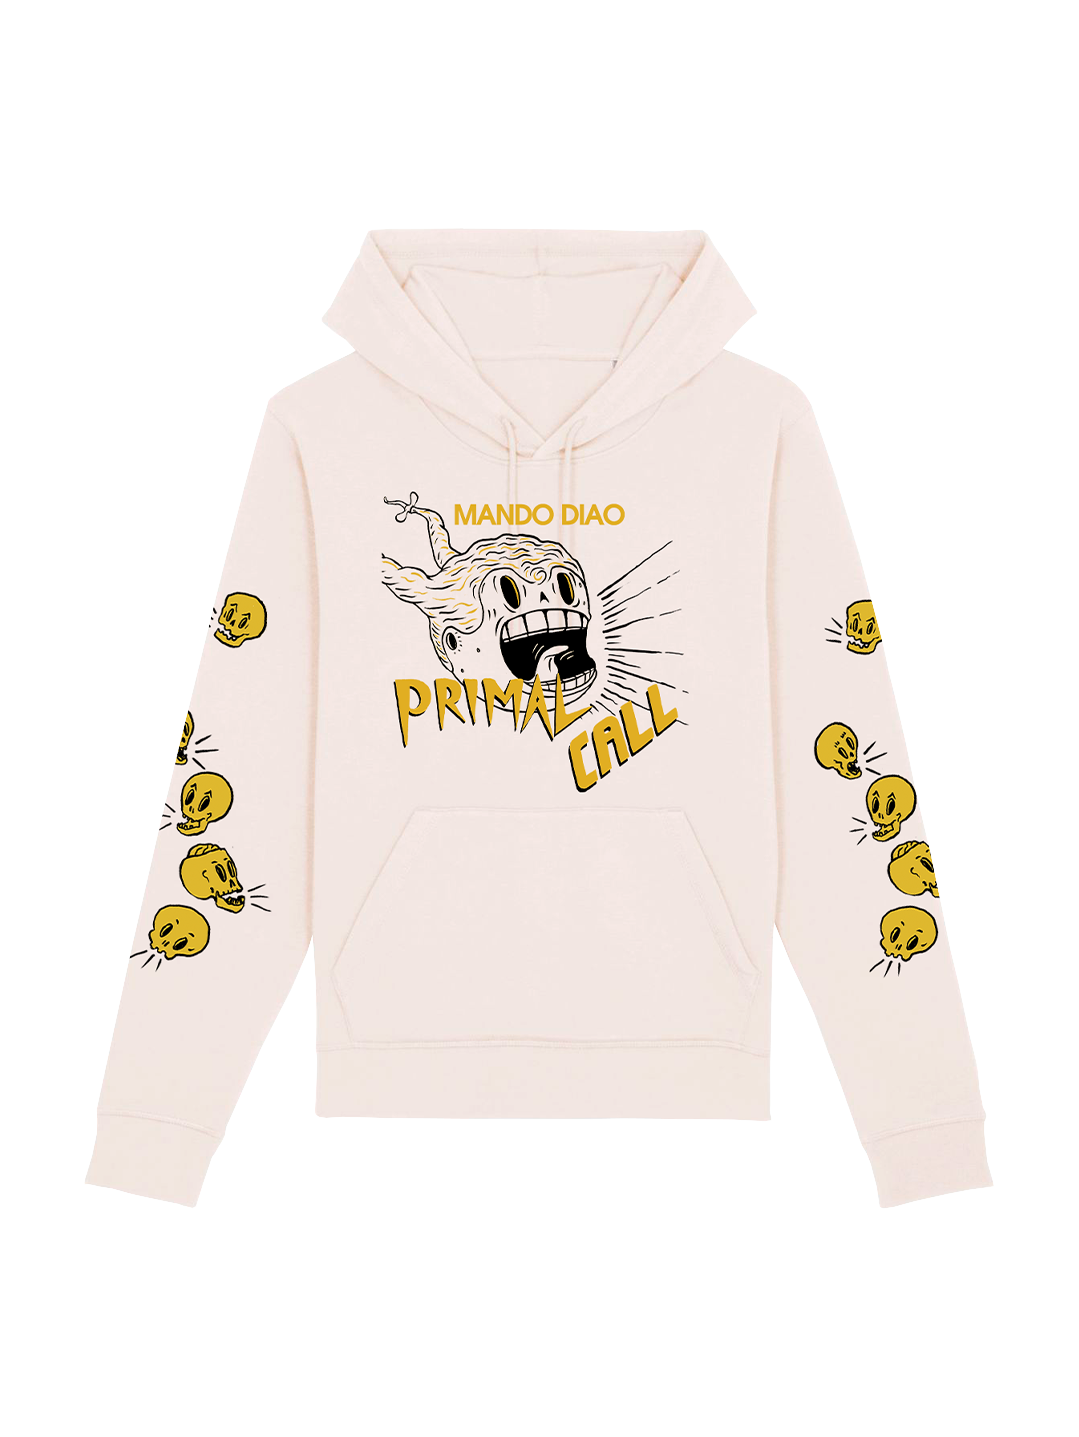 PRIMAL CALL OFF-WHITE HOODIE